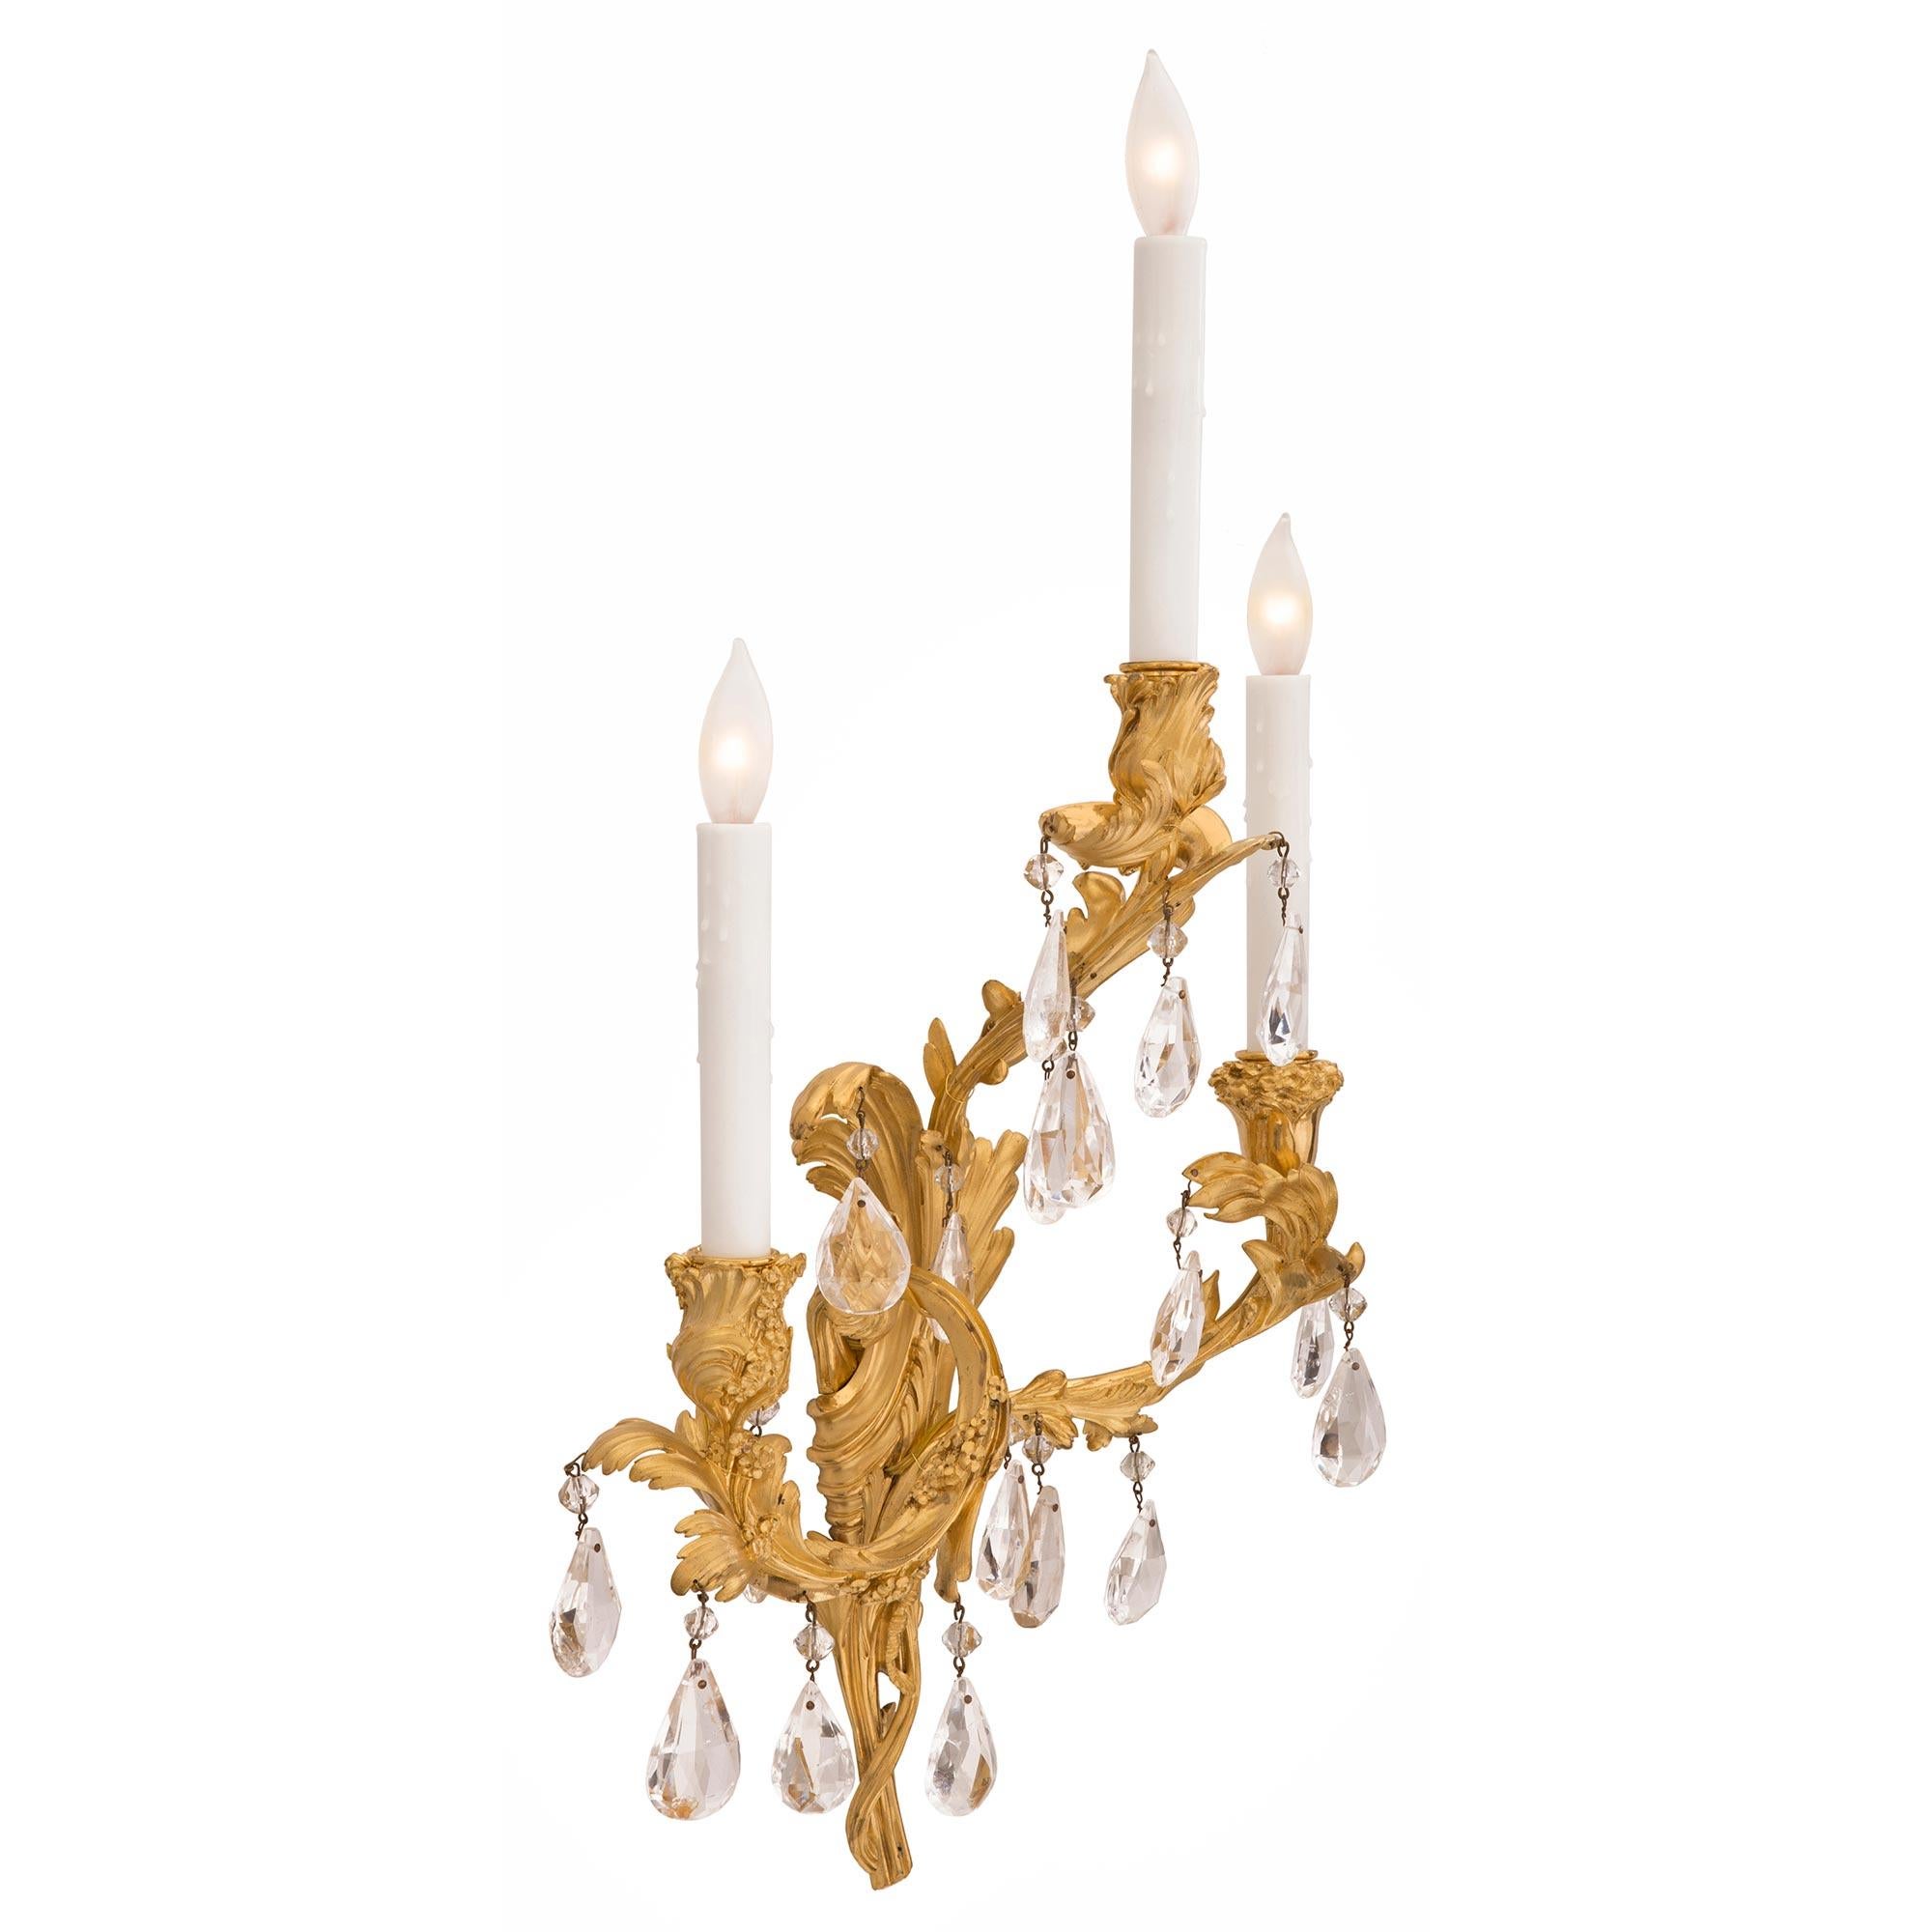 A beautiful and very high-quality pair of French 19th century Louis XV st. Belle Époque period ormolu and rock crystal sconces. Each three-arm sconce is centered by a charming and most decorative pierced scrolled foliate design leading up the body